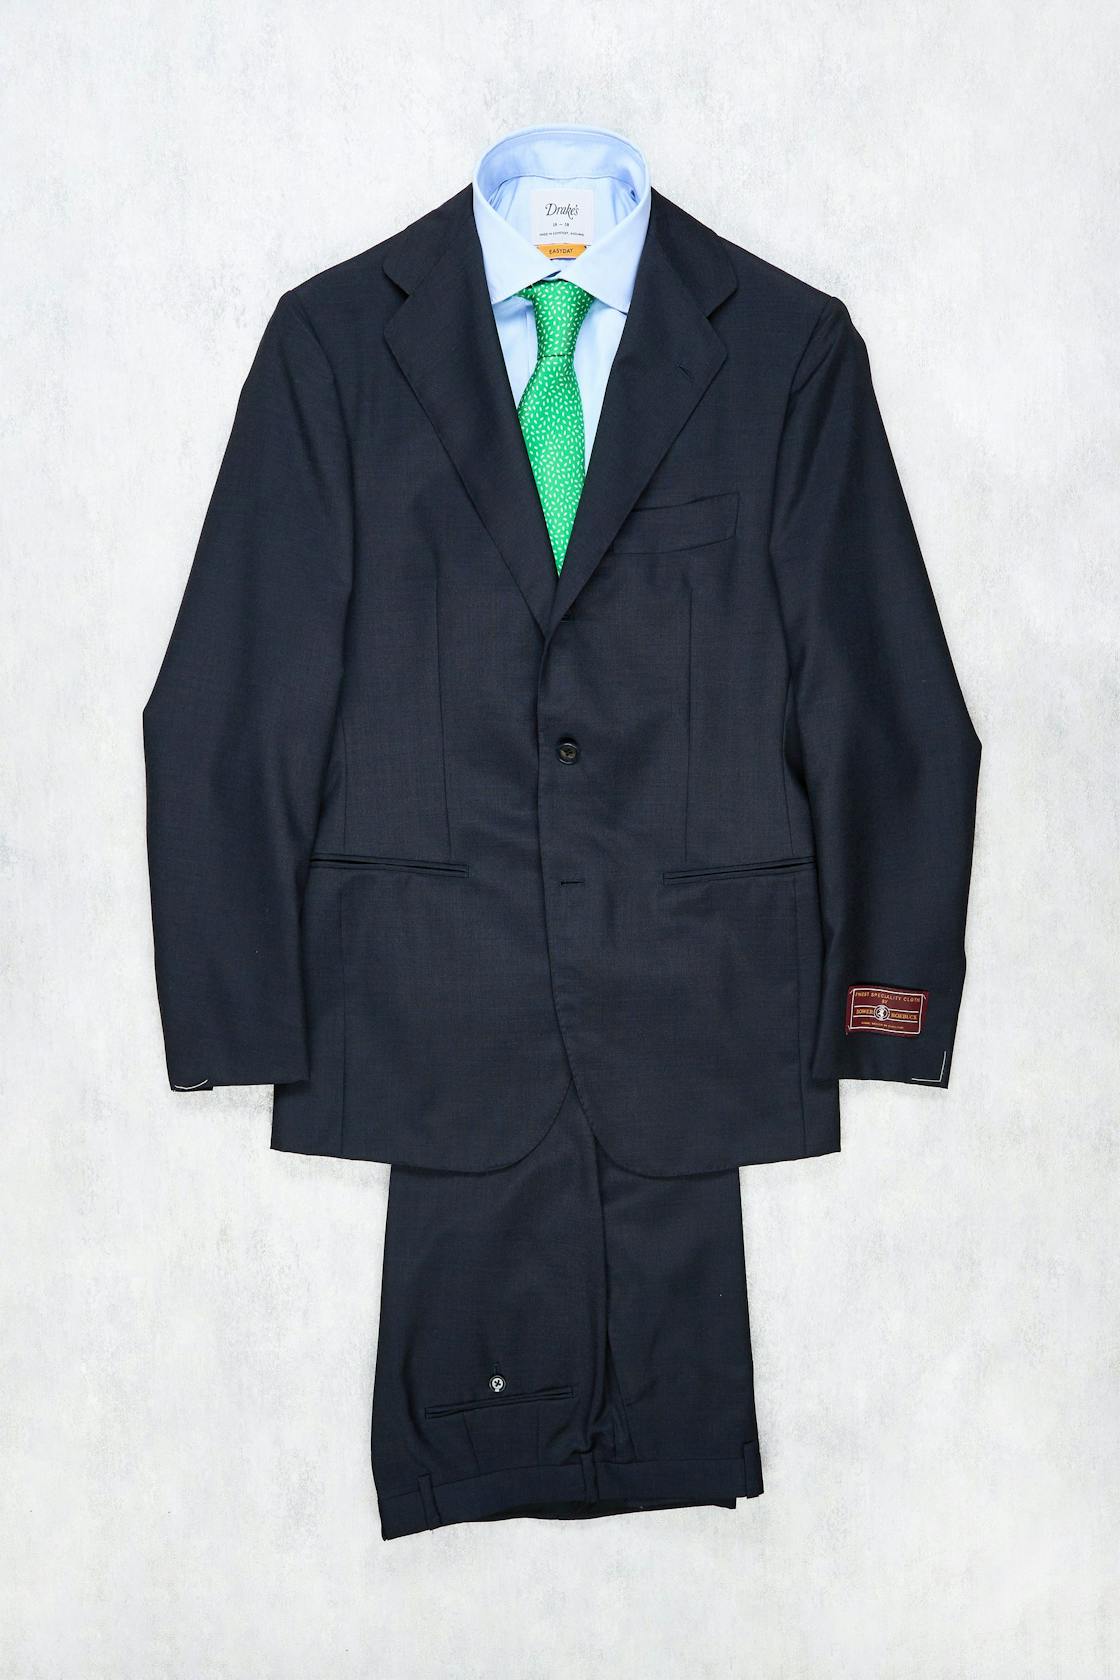 The Armoury by Ring Jacket Model 1 Dark Navy Mohair/Silk Suit